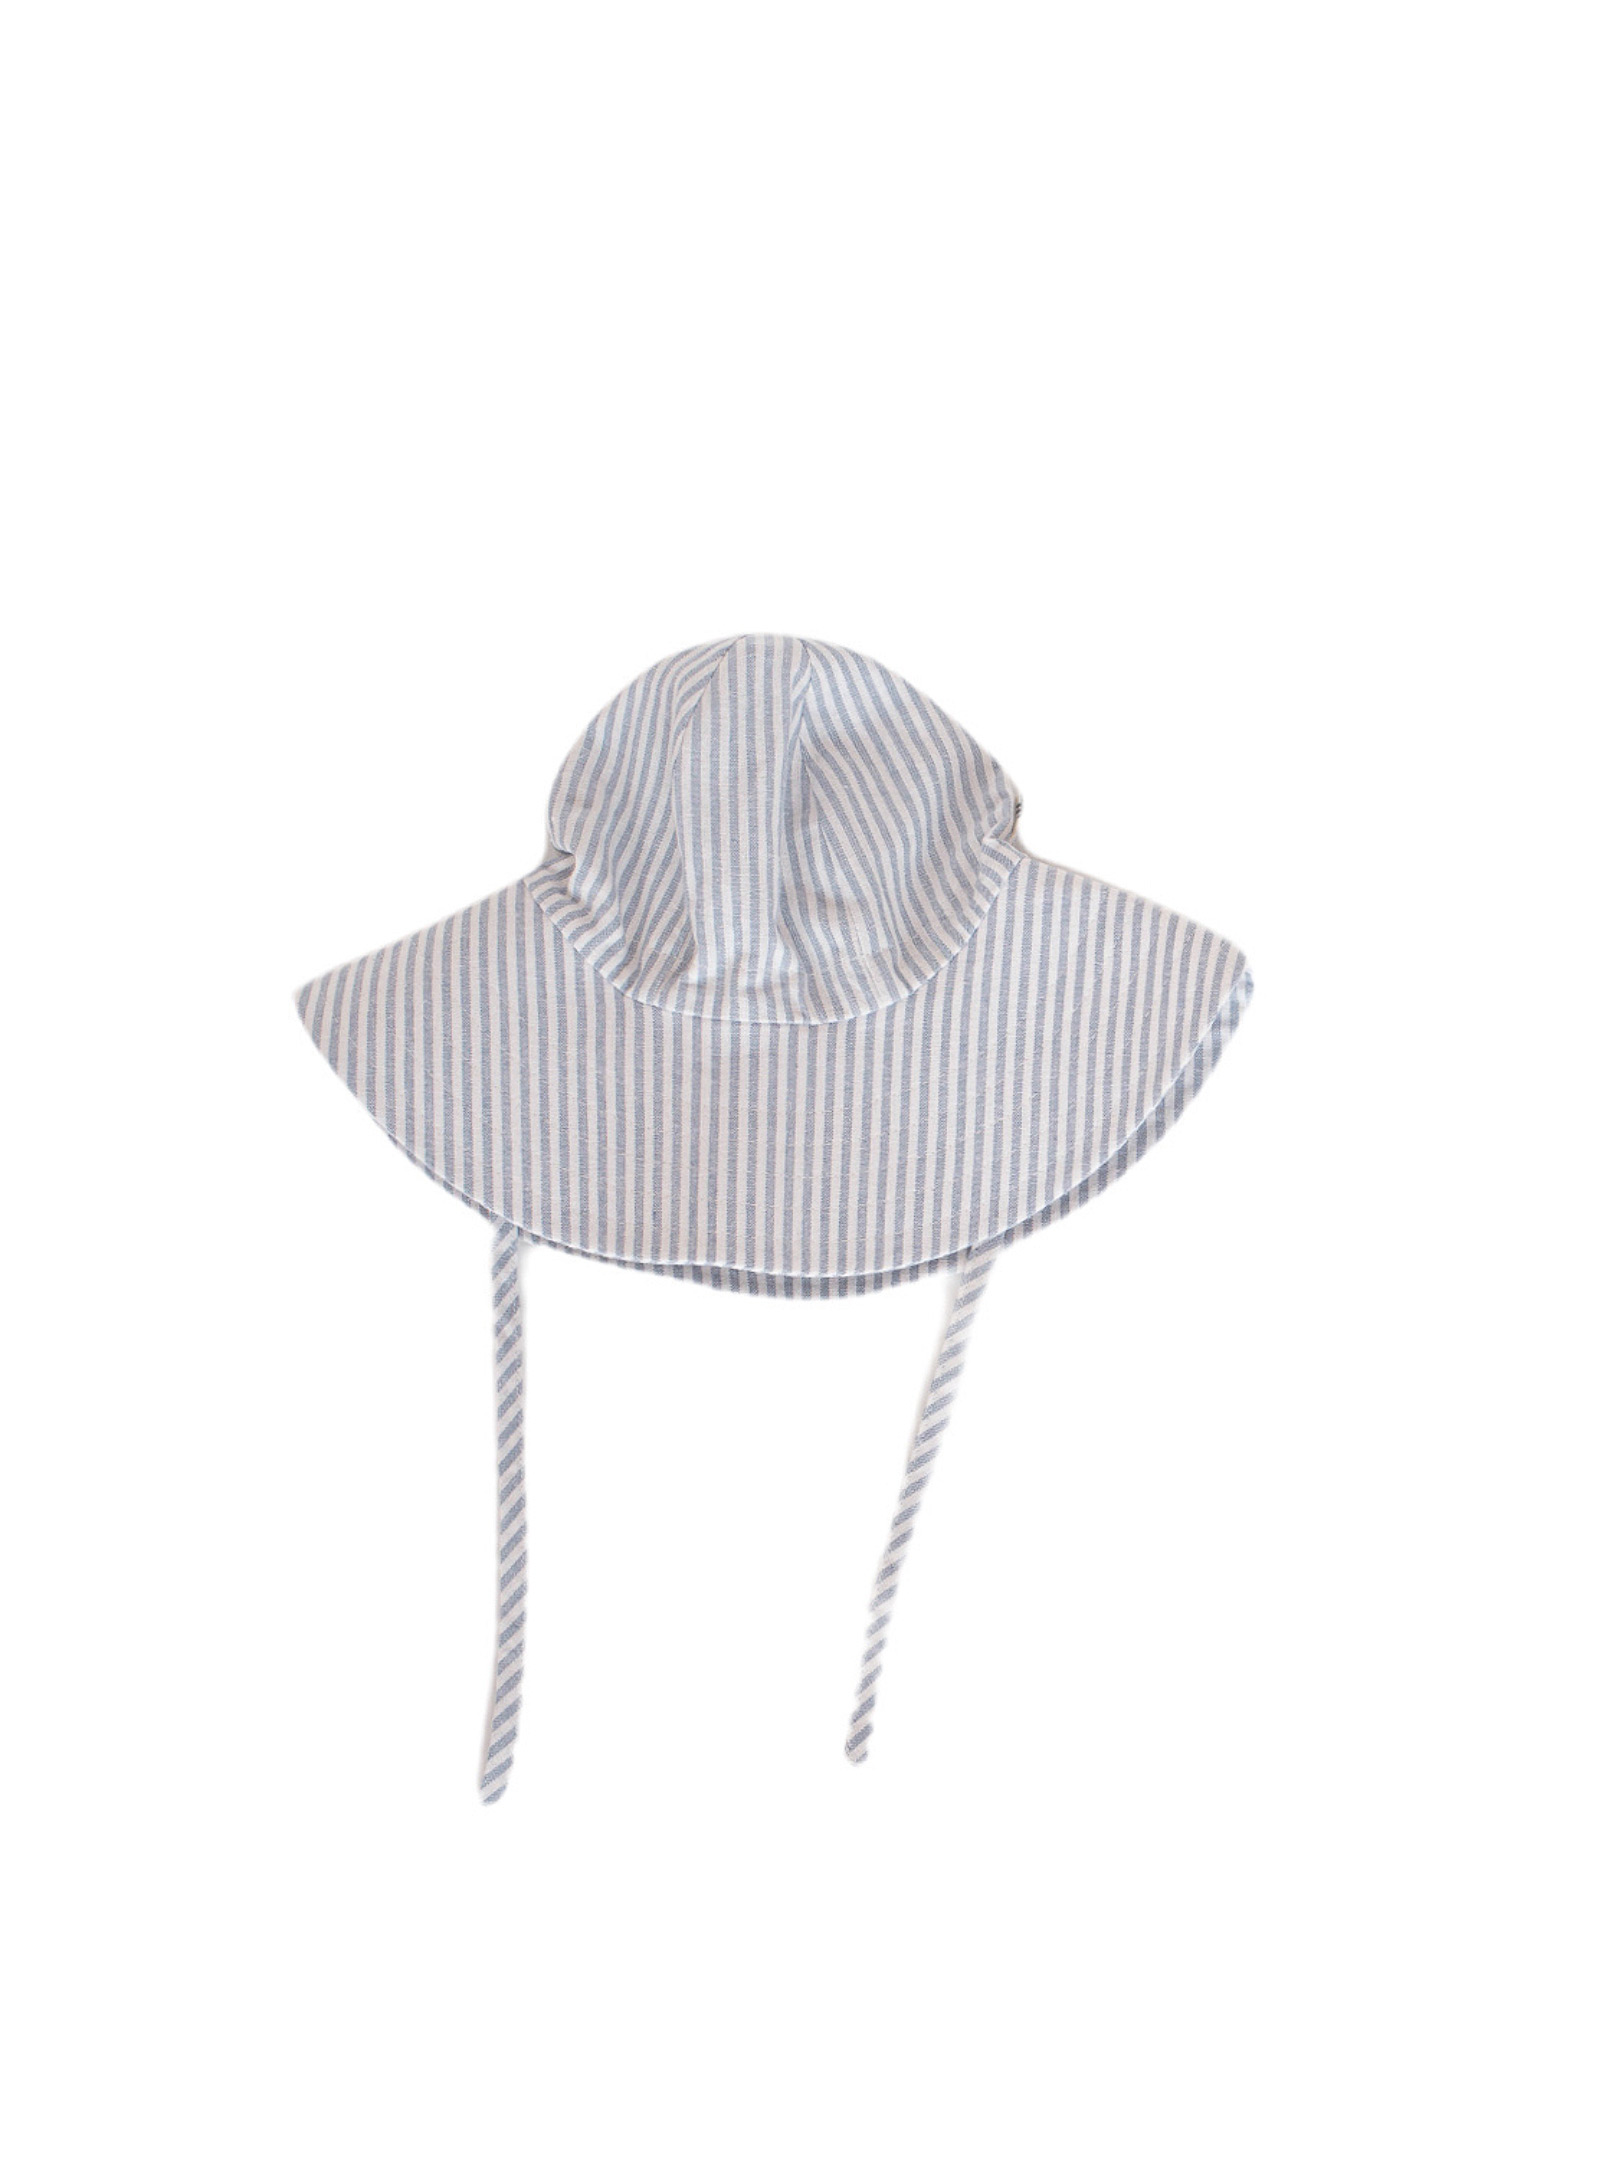 Les petites natures - Pure linen bucket hat 6-12 months to 4-8 years